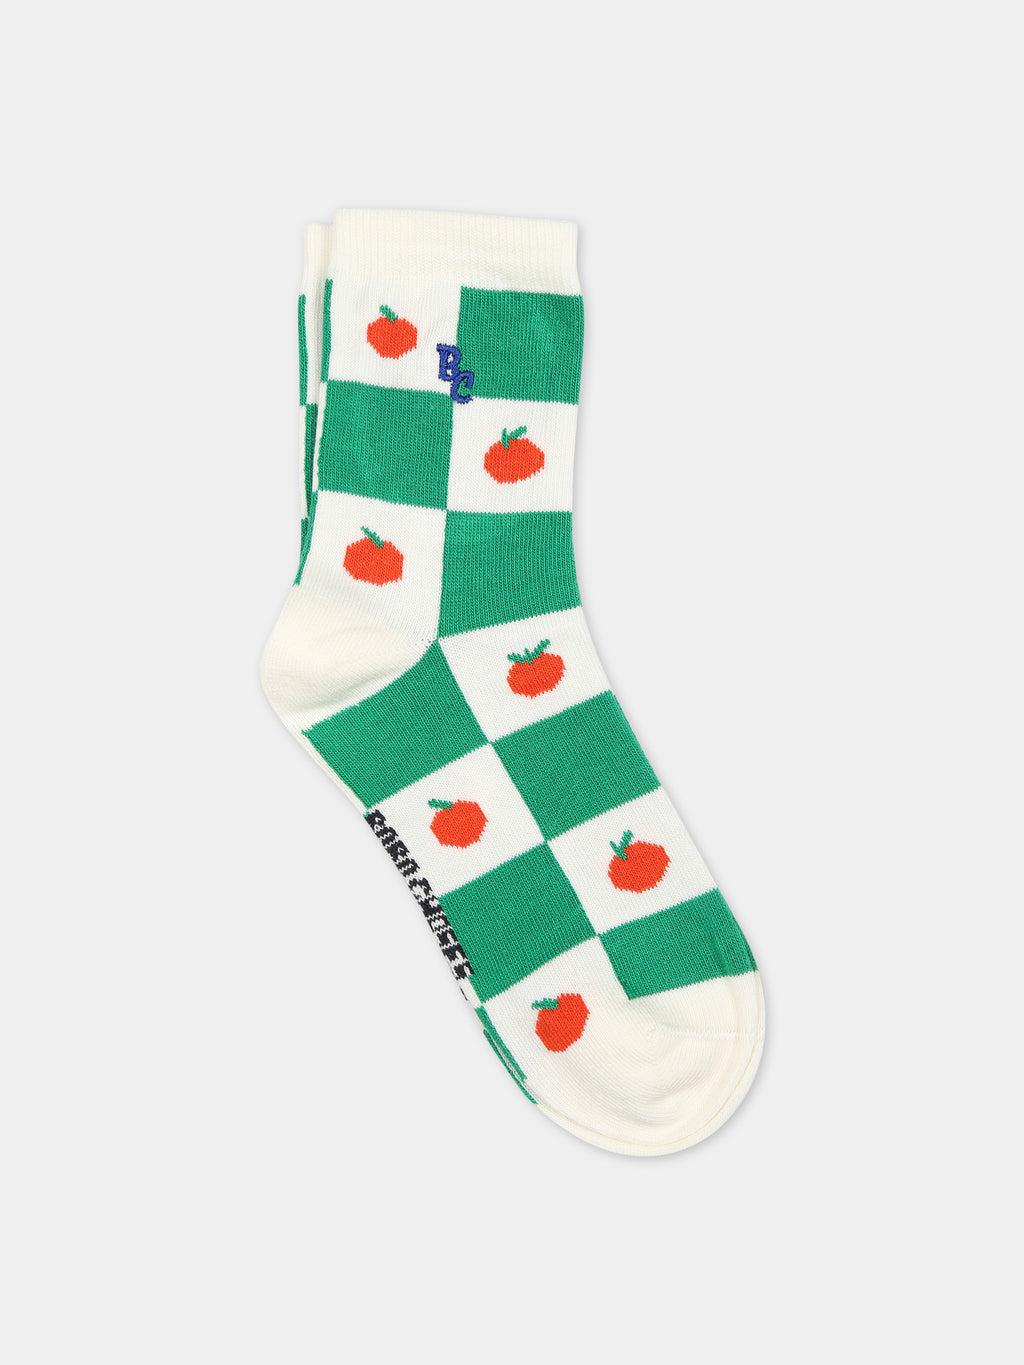 Green socks for kids with tomatoes